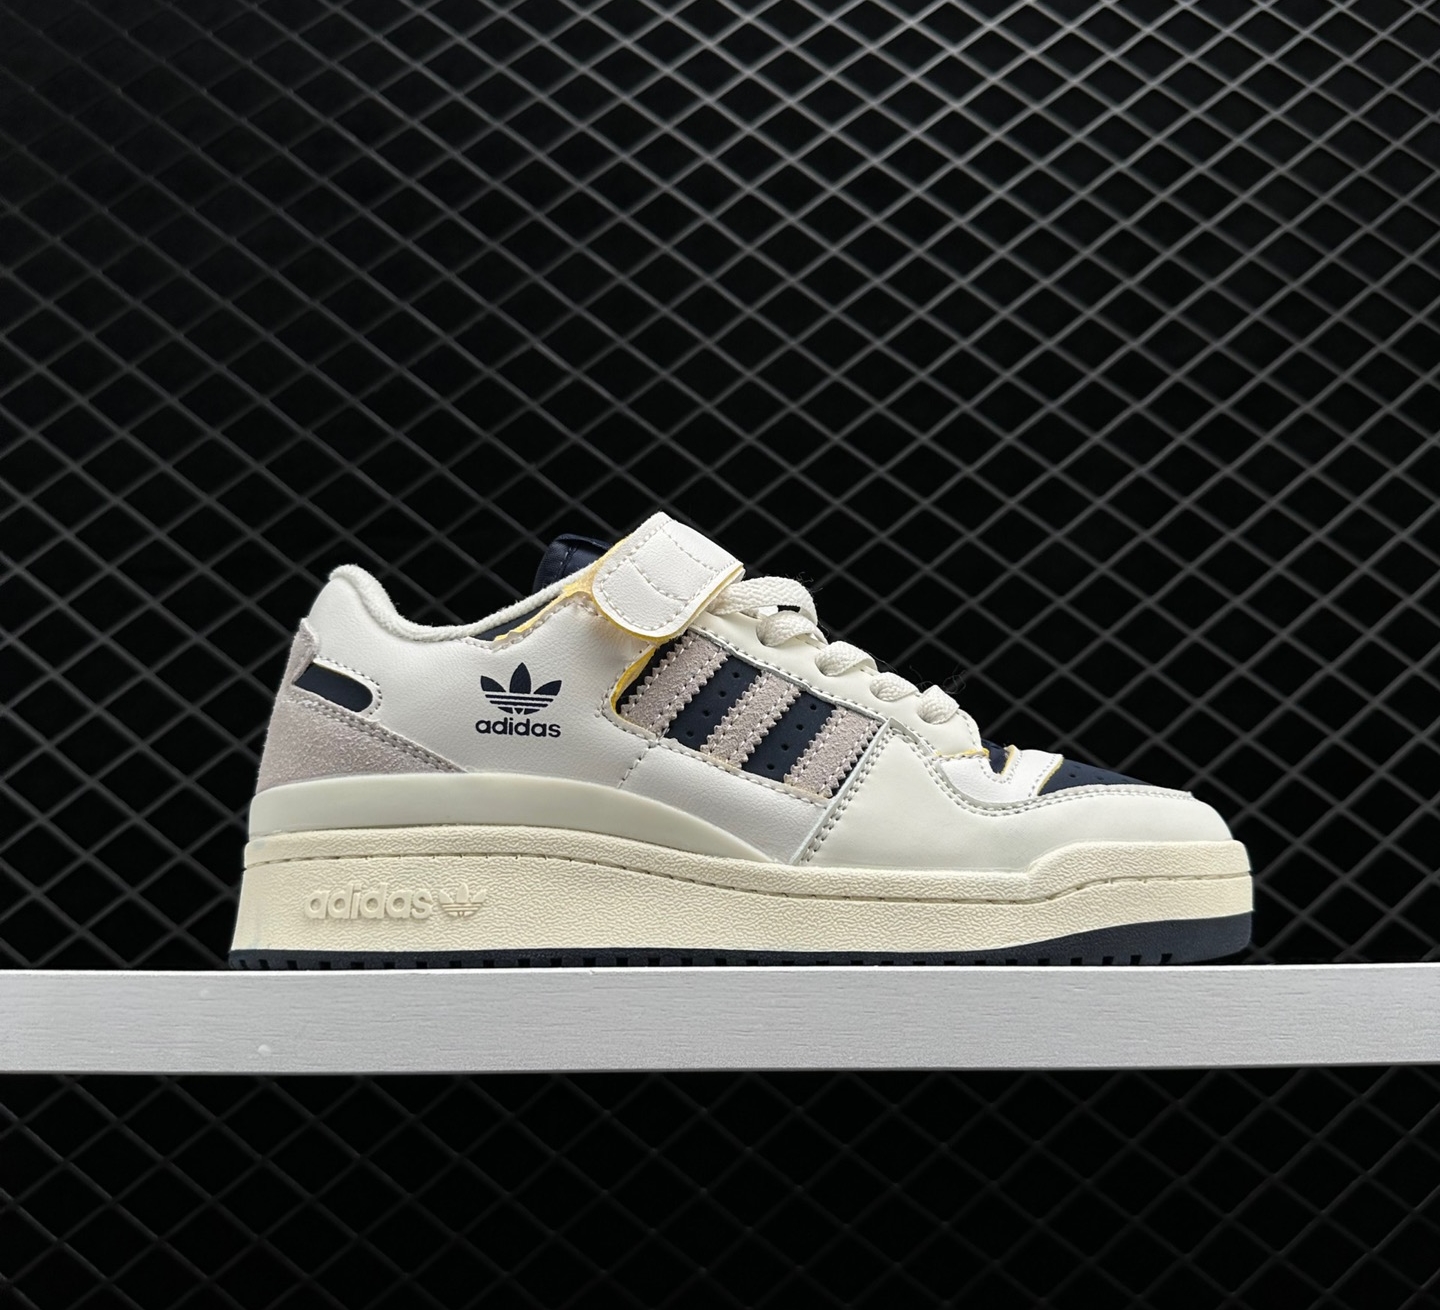 Adidas Forum 84 Low 'Off White Collegiate Navy' GZ6427 - Classic Style with a Contemporary Twist